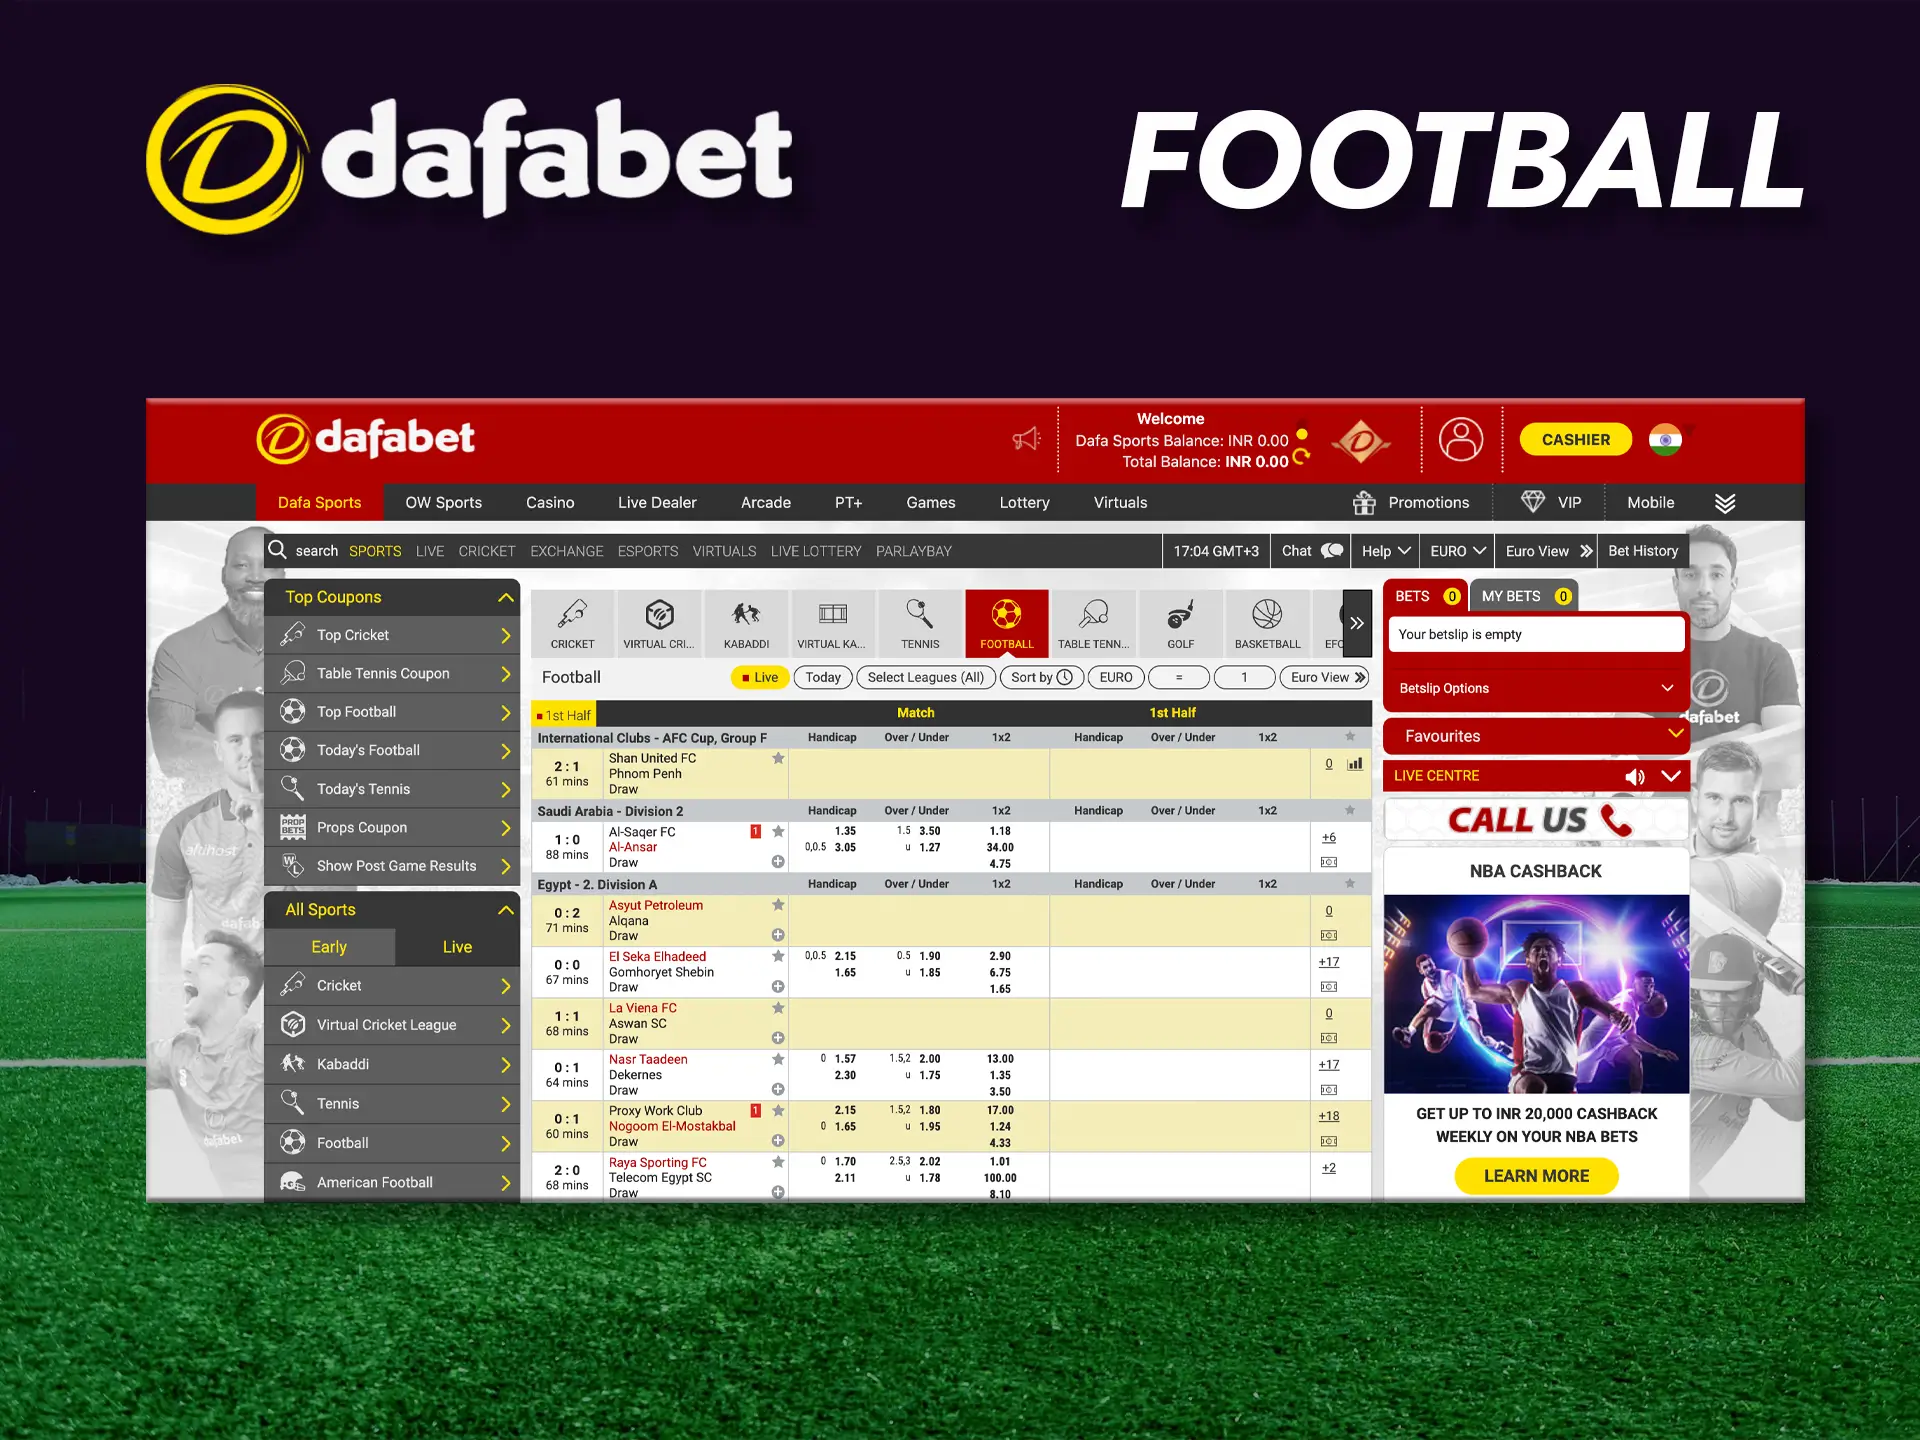 Football in India is just as popular and waiting for your outcomes at Dafabet.